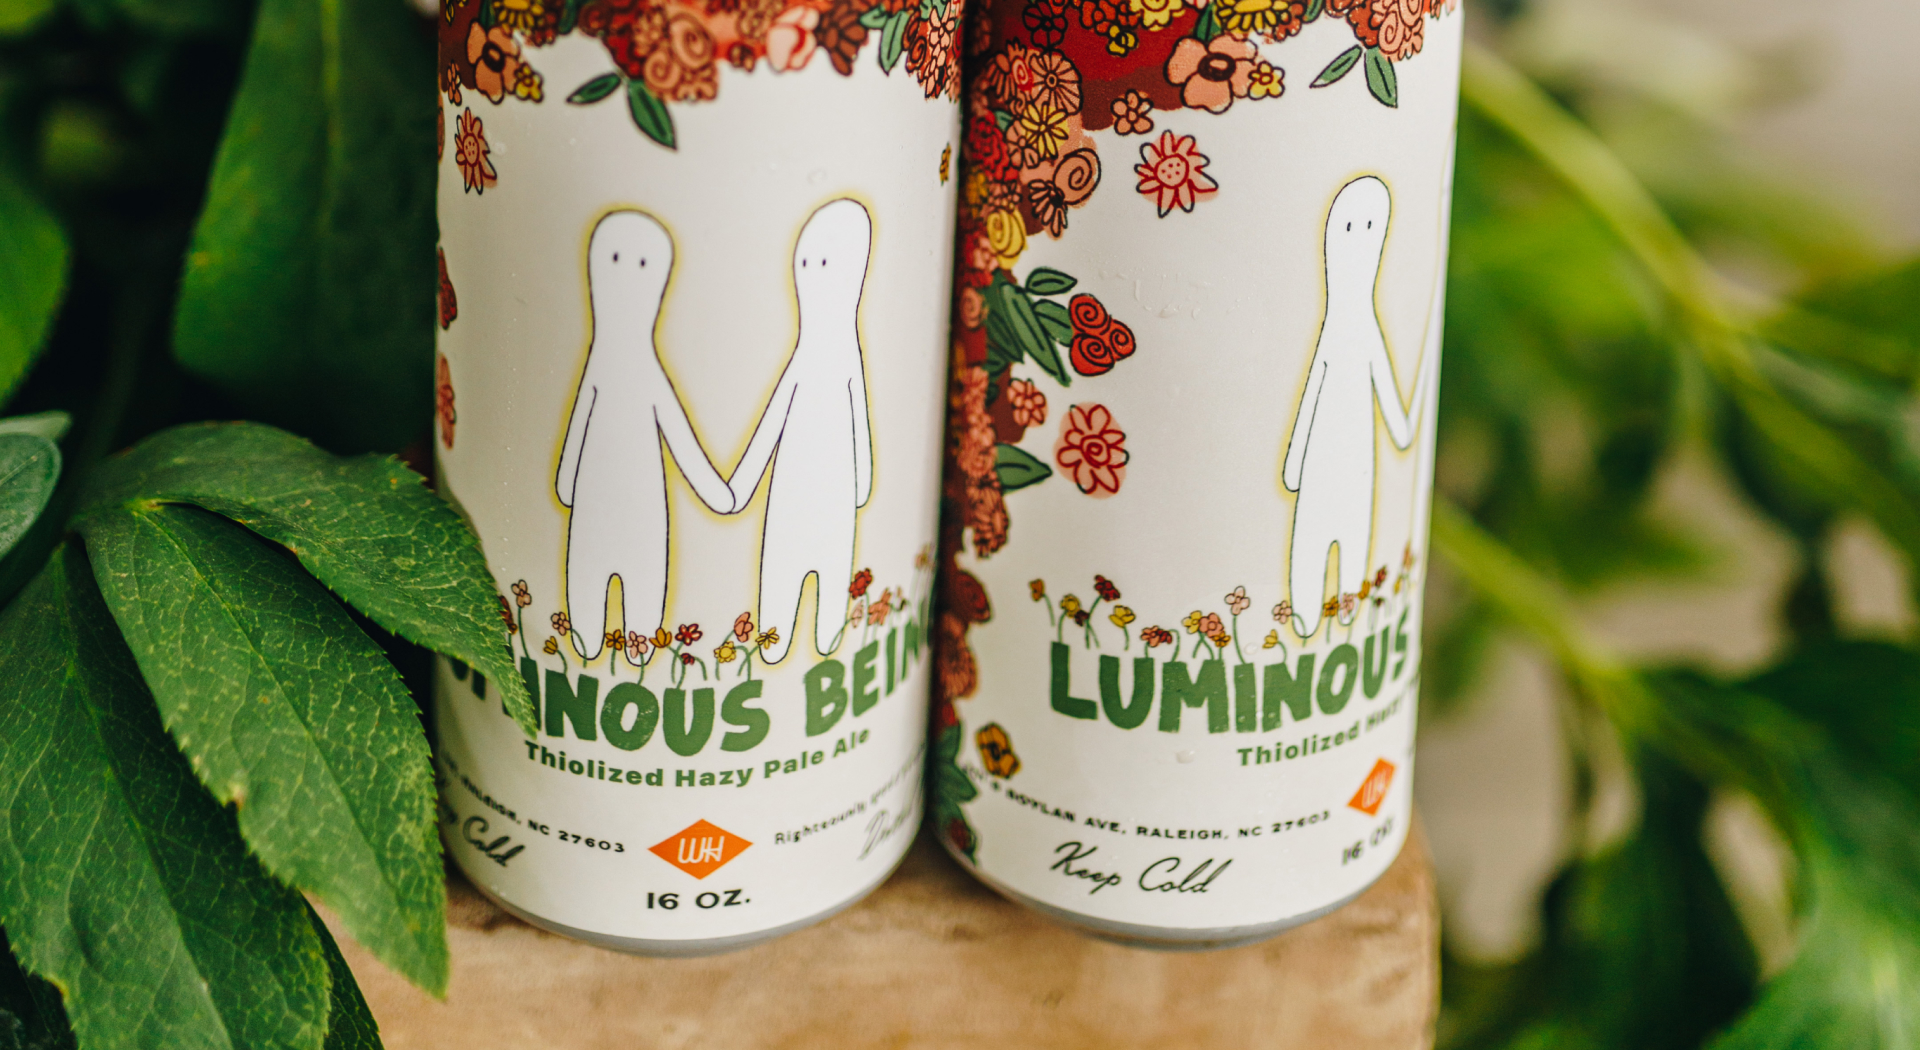 Cans of Luminous Beings by Wye Hill brewing sitting amongst foliage